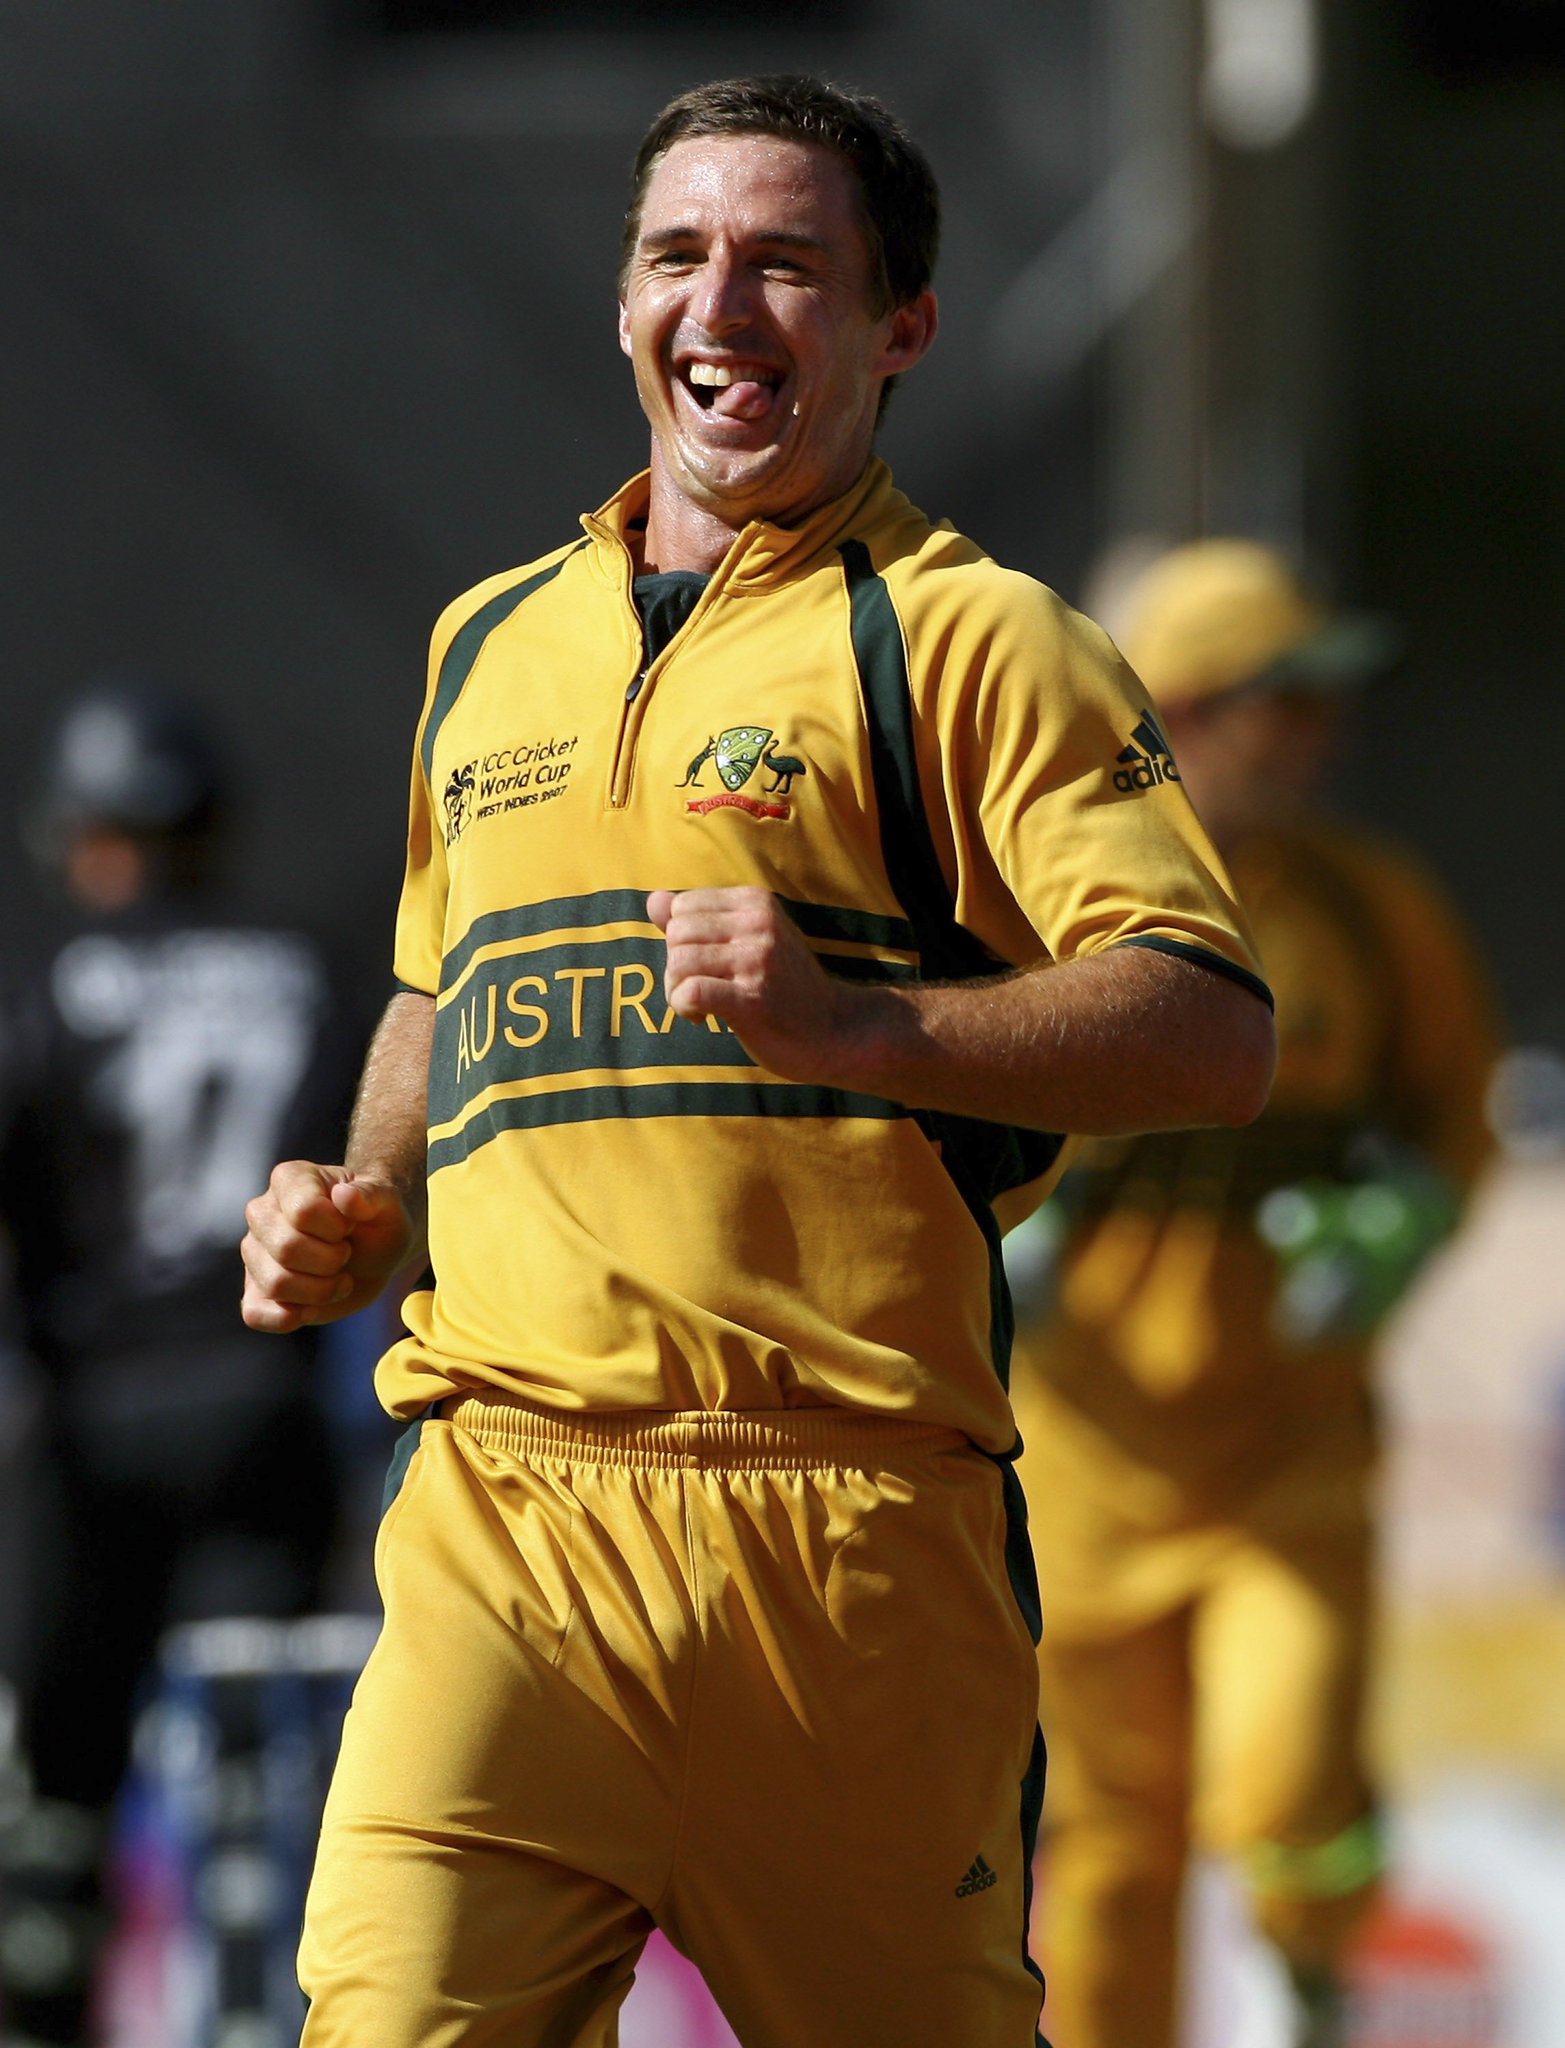 He took 21 wickets as Australia won their third successive cricketworldcup in 2007 - Happy Birthday Brad_Hogg! 